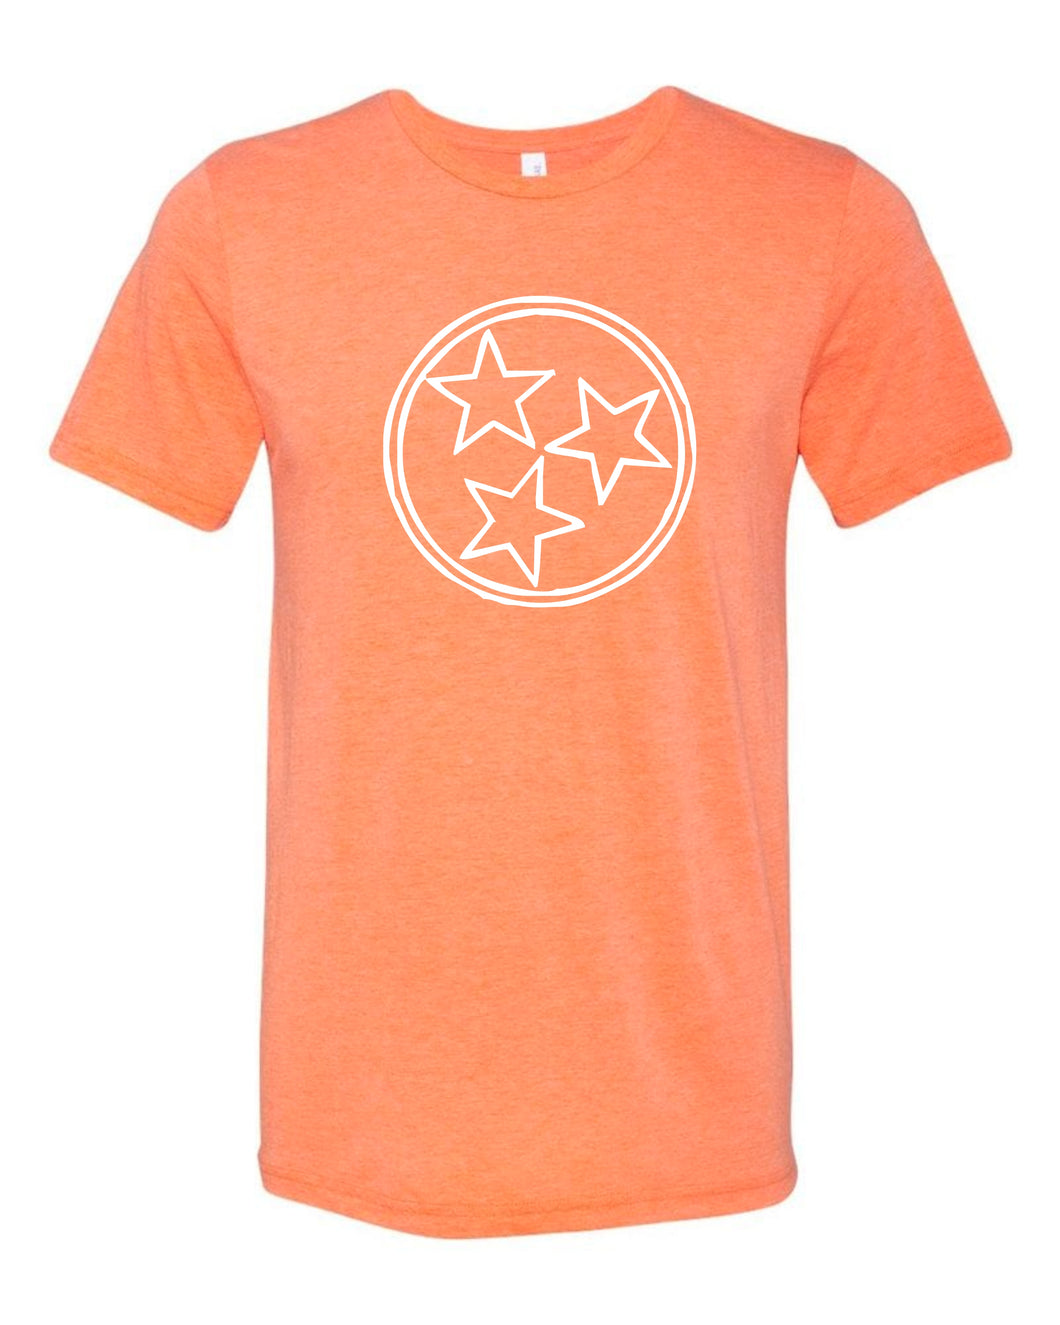 Orange Tri Star — bright and durable children's clothes, with love from Tennessee!